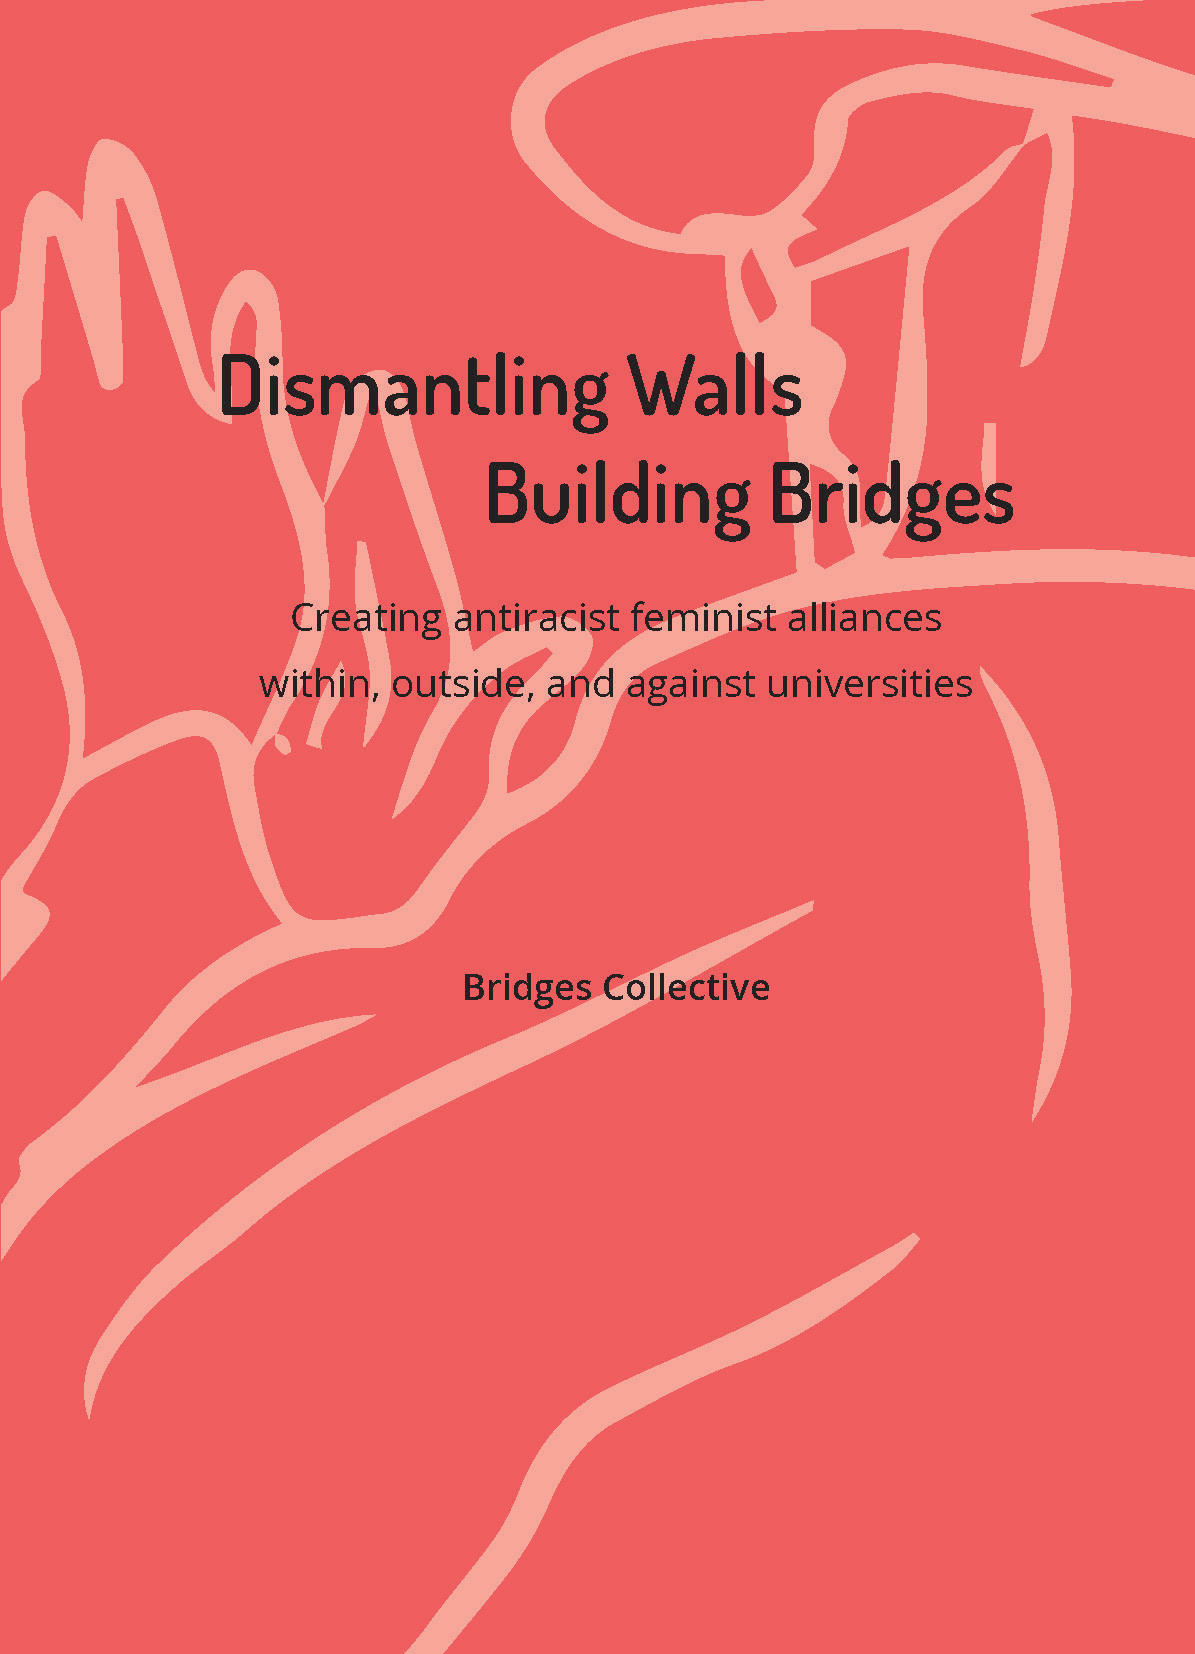 You are currently viewing Monograph: “Dismantling walls, building bridges: Creating antiracist feminist alliances within, outside, and against universities”